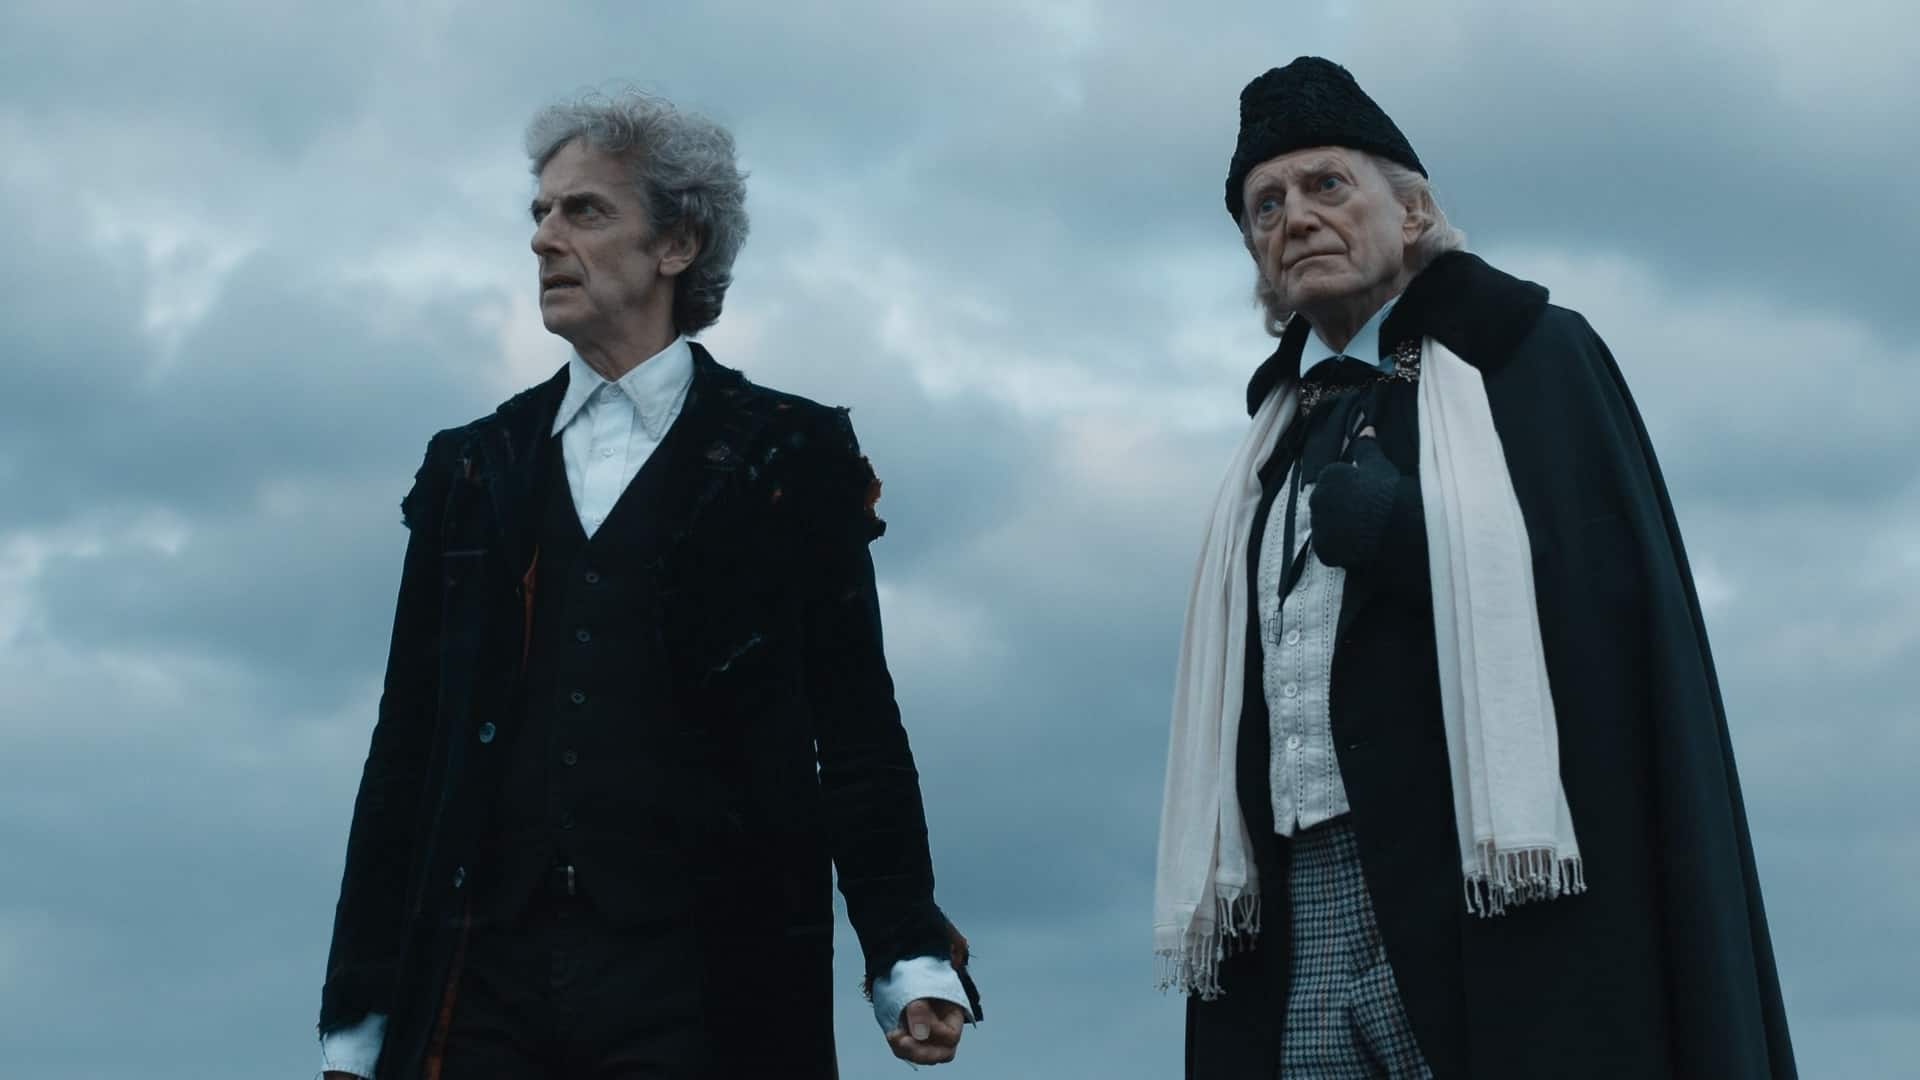 The Twelfth Doctor Meets the First Doctor